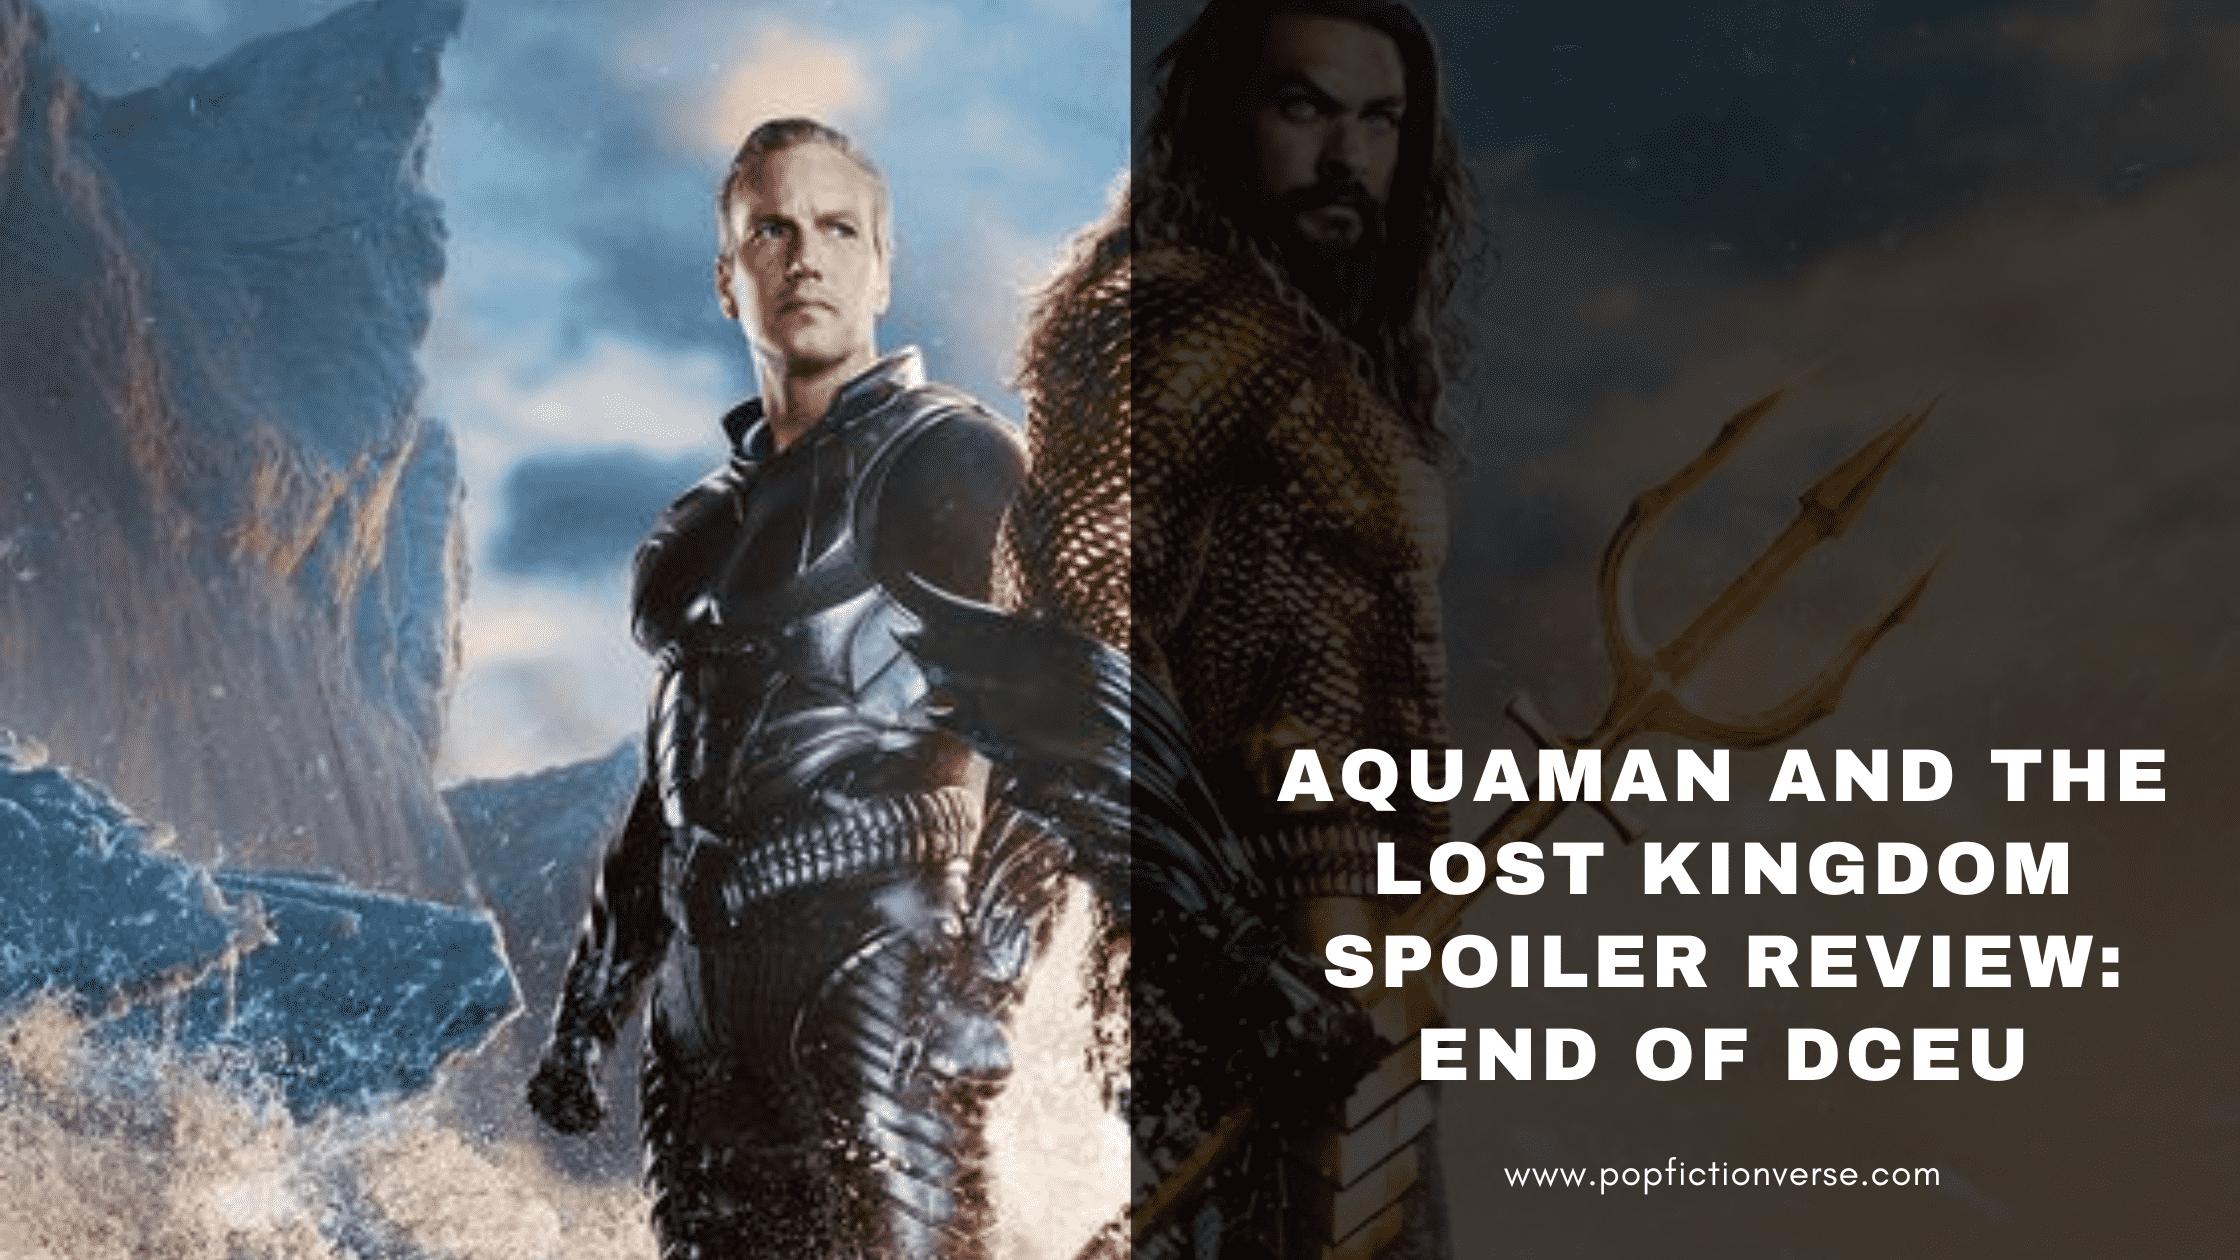 Aquaman and the Lost Kingdom Spoiler Review: End Of DCEU